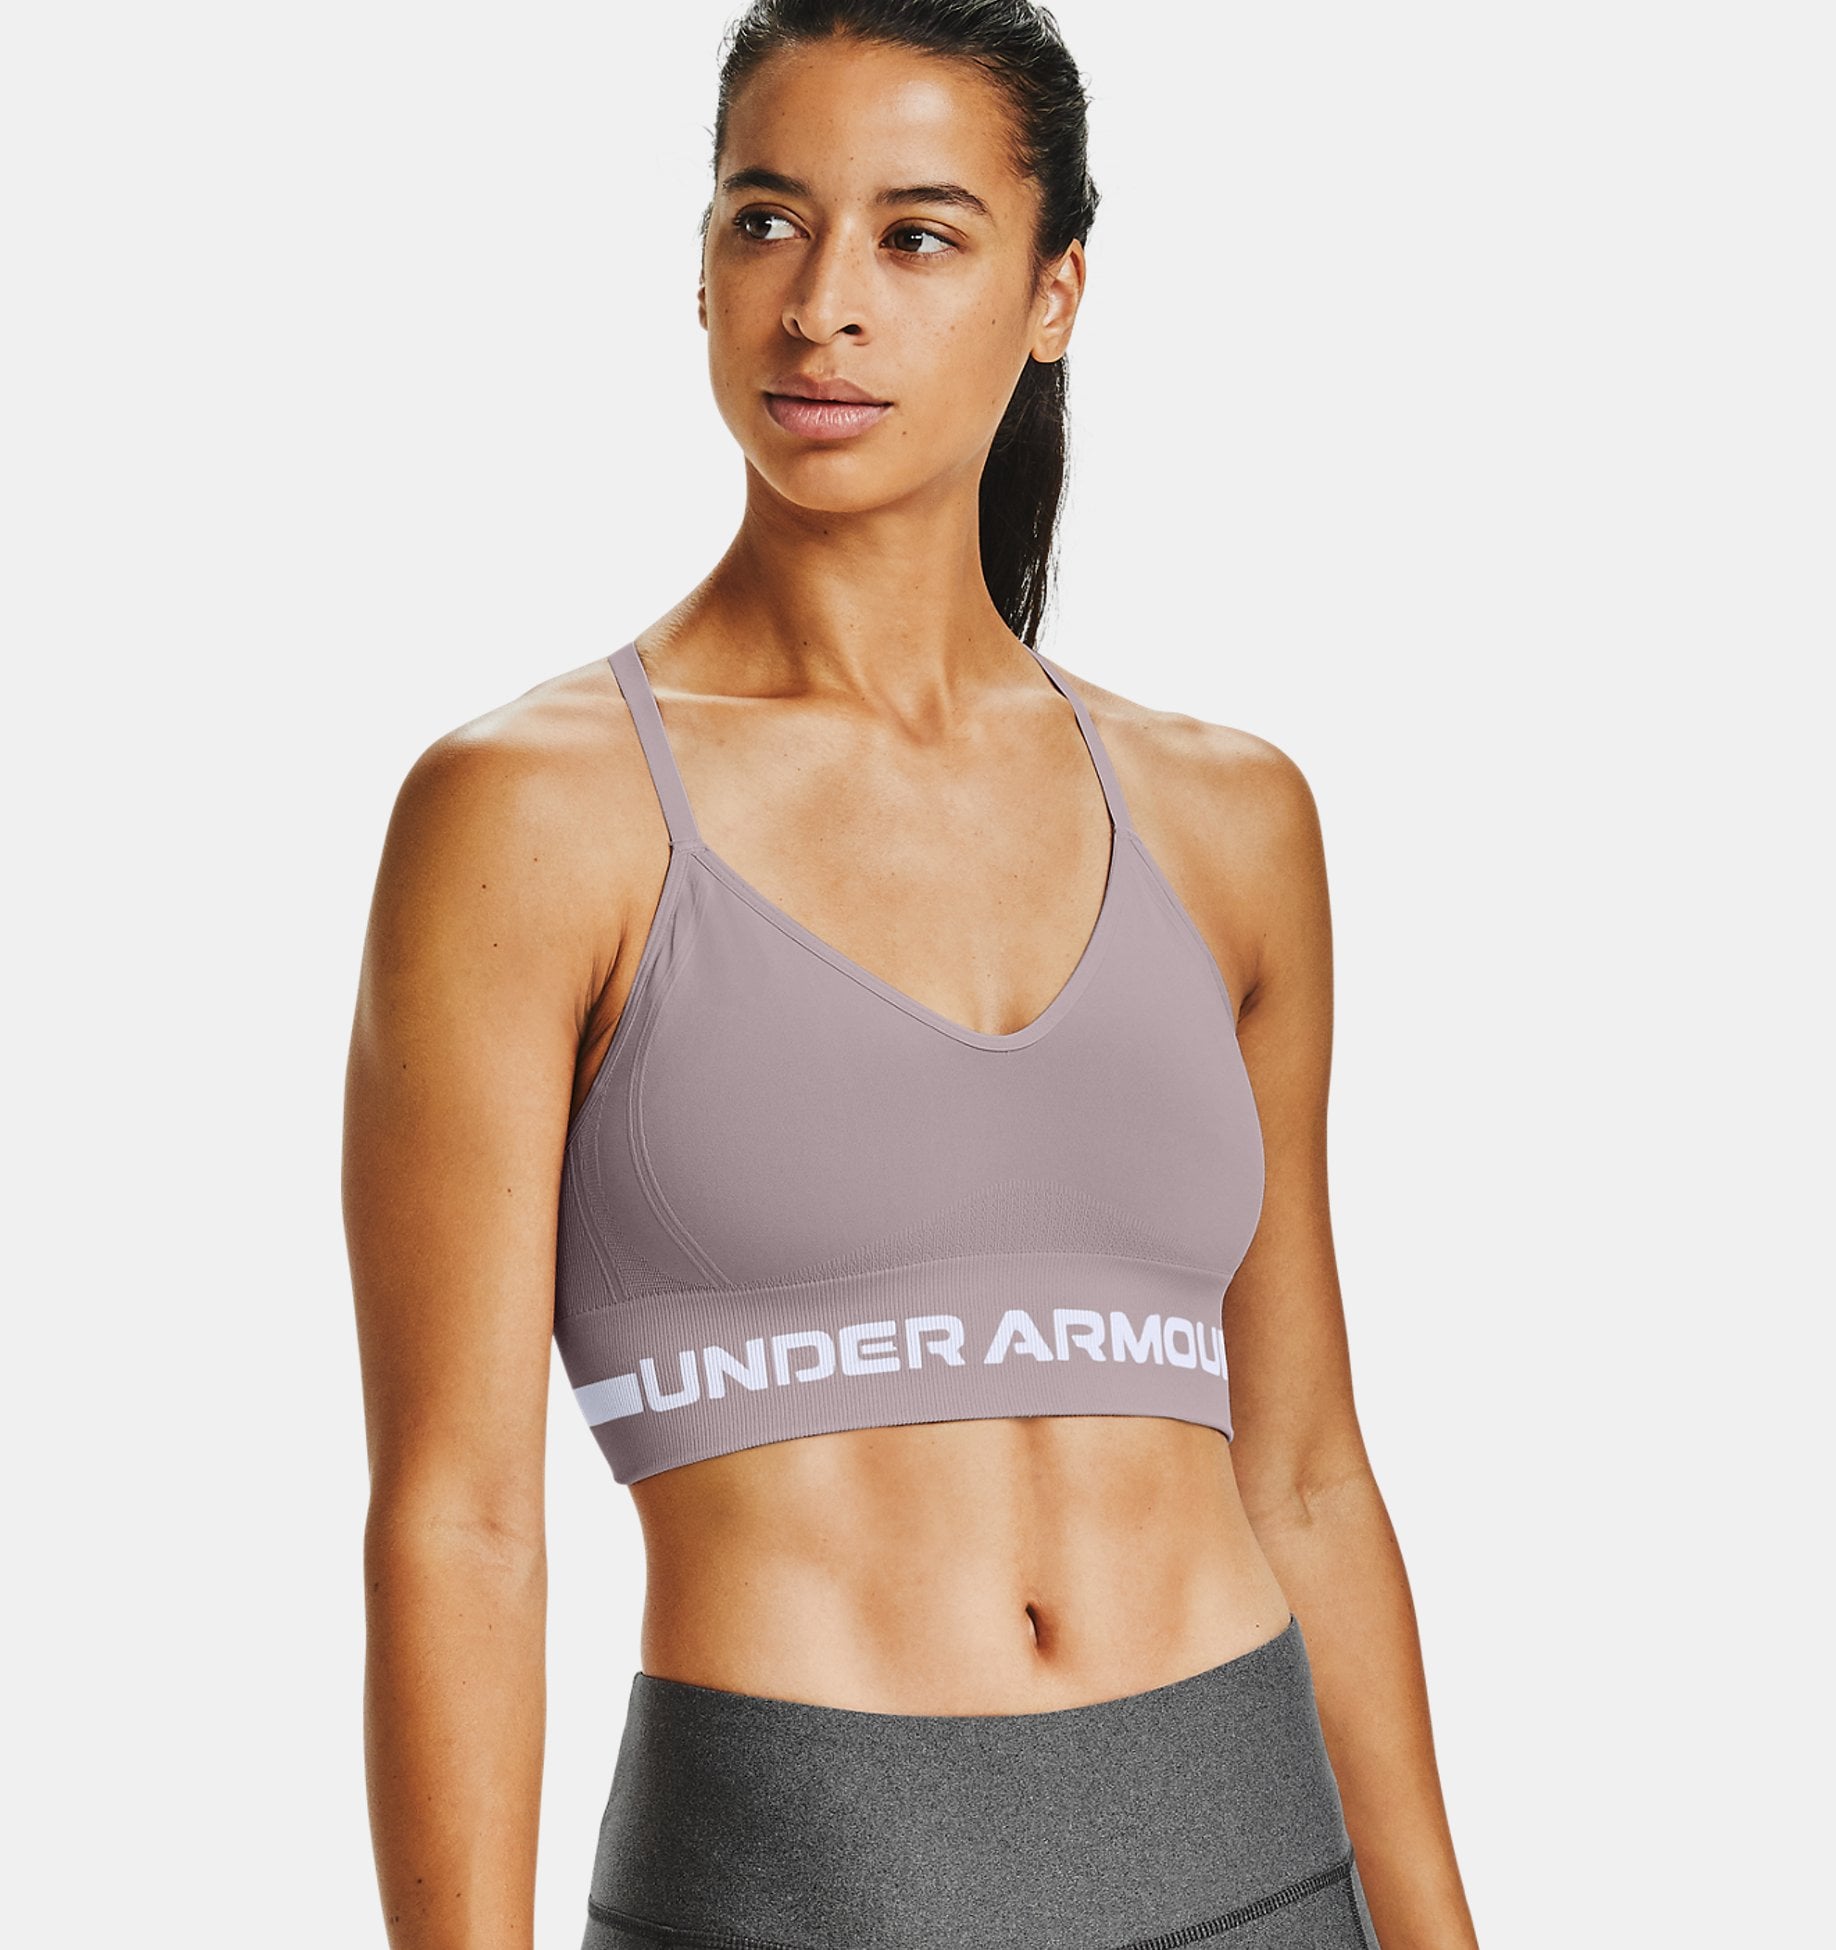 Under Armour Womens Printed Mid Sports Support Bra Top Purple Gym Breathable 